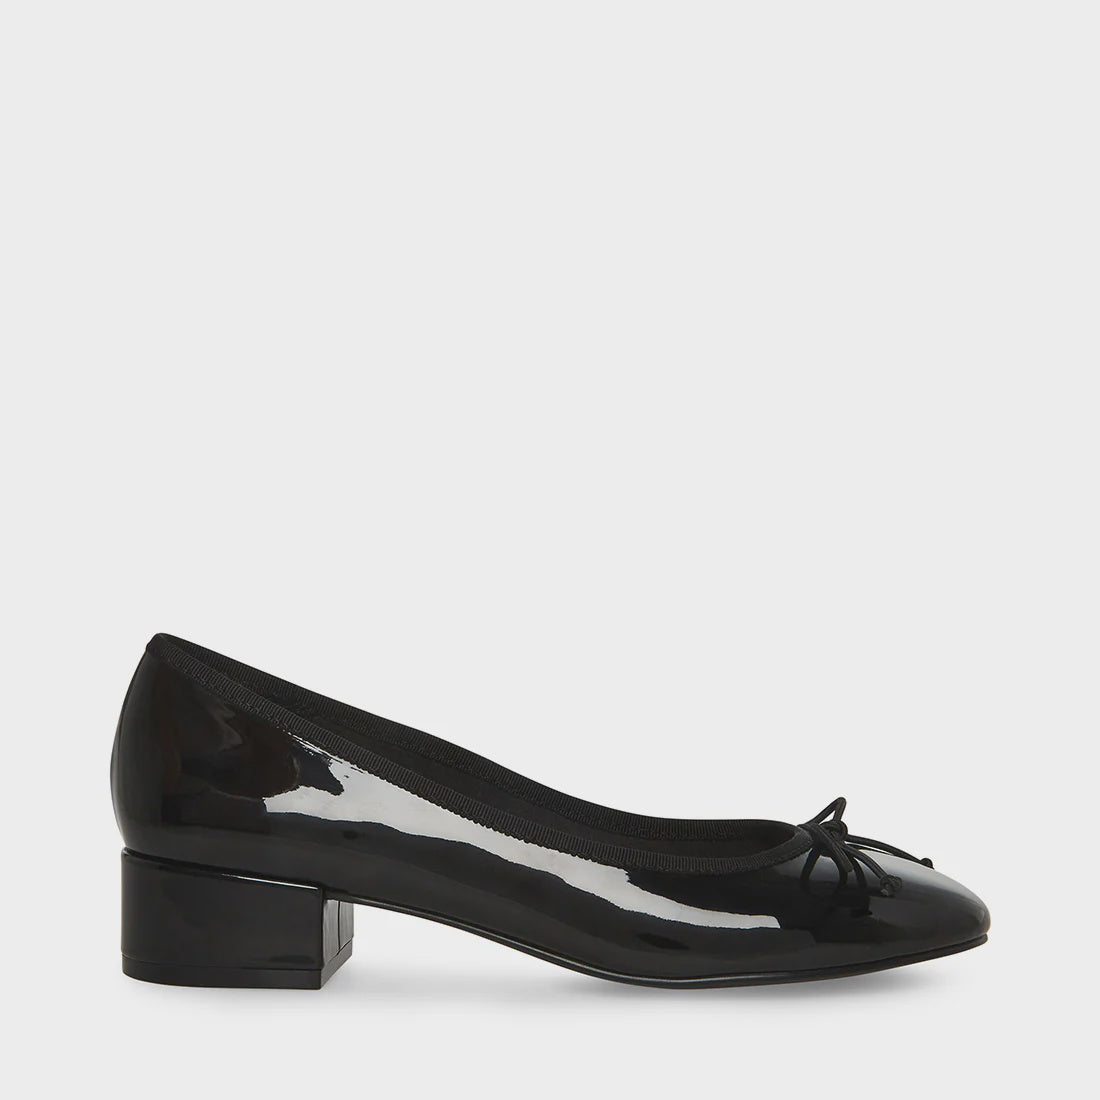 STEVE MADDEN - CHERISH PUMP IN BLACK PATENT SYNTHETIC LEATHER - the ...